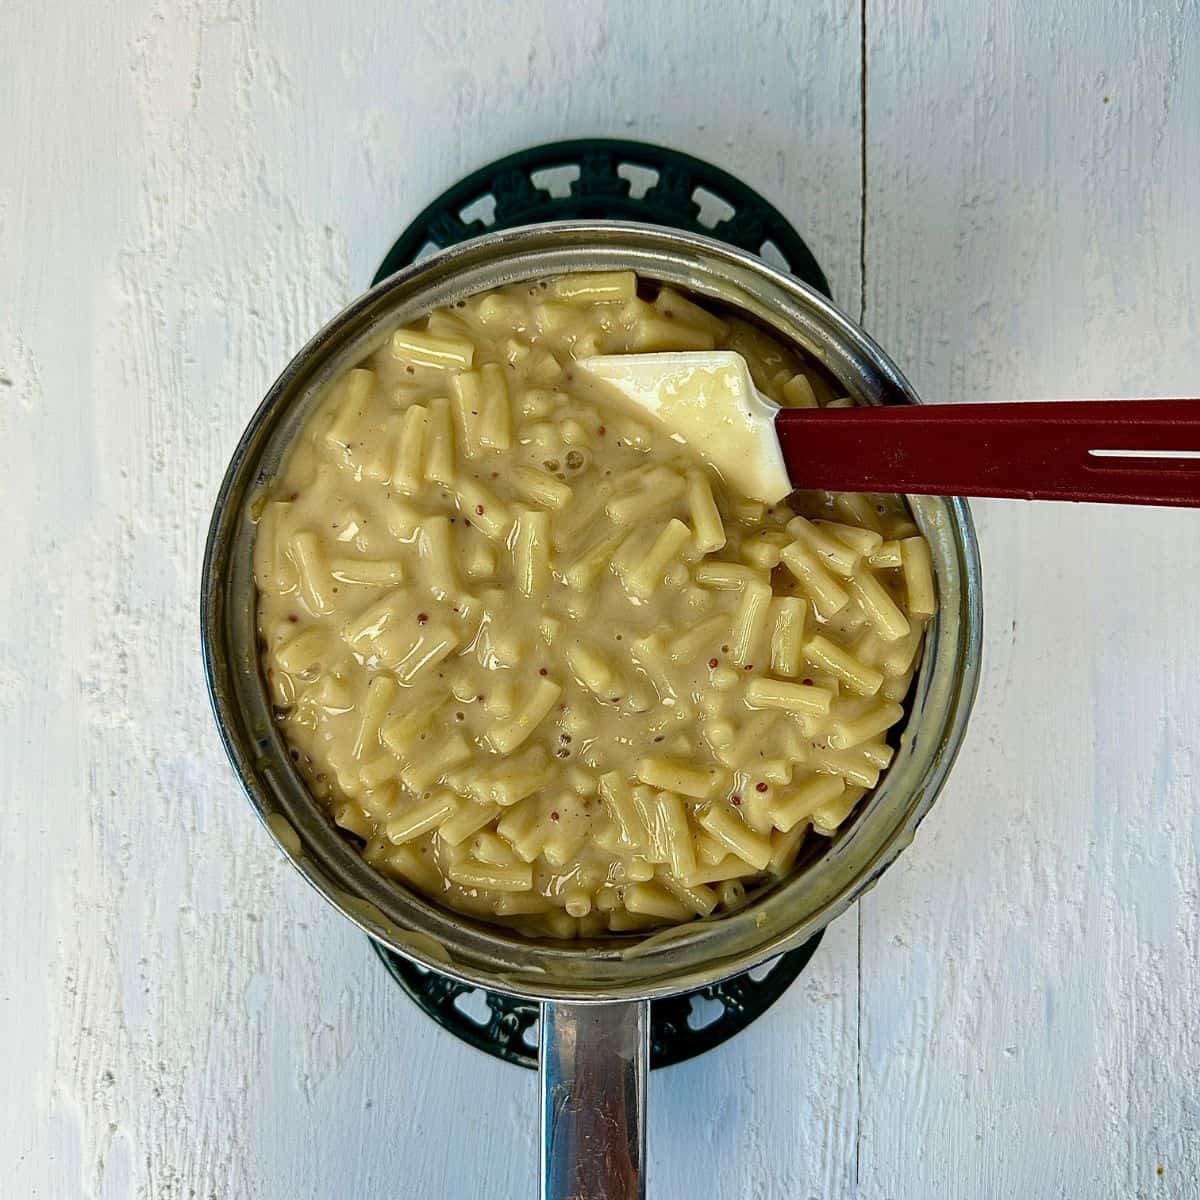 A stainless steel saucepan containing cooked macaroni mixed with a vegan cheese sauce.